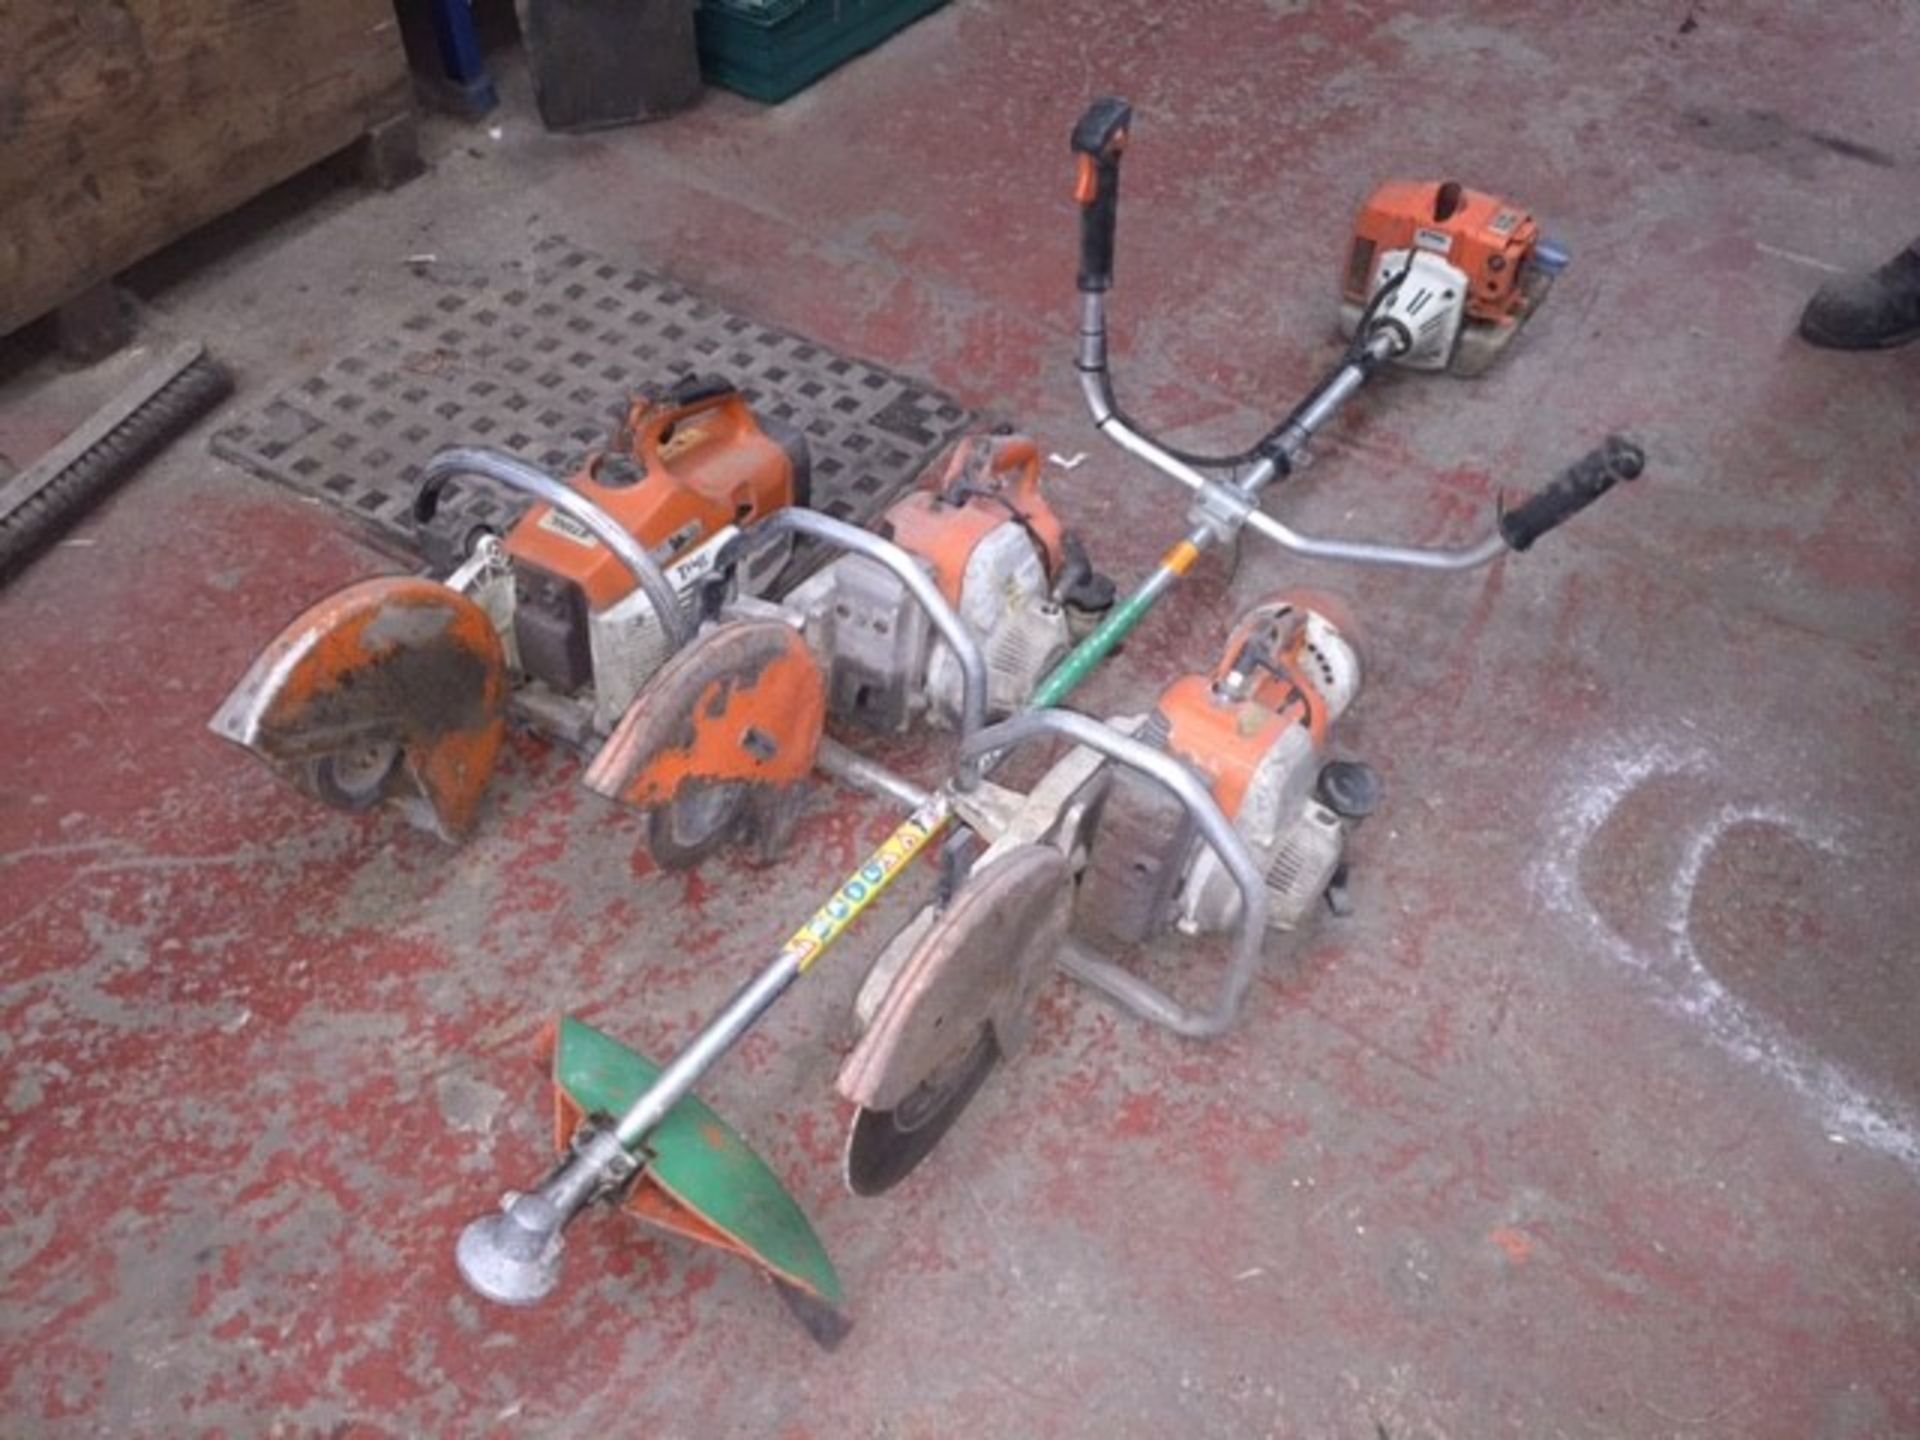 * 3 x Stihl Saws (2 x TS350, 1 x TS400) together with FS120 Strimmer (Spares or Repair). Please note